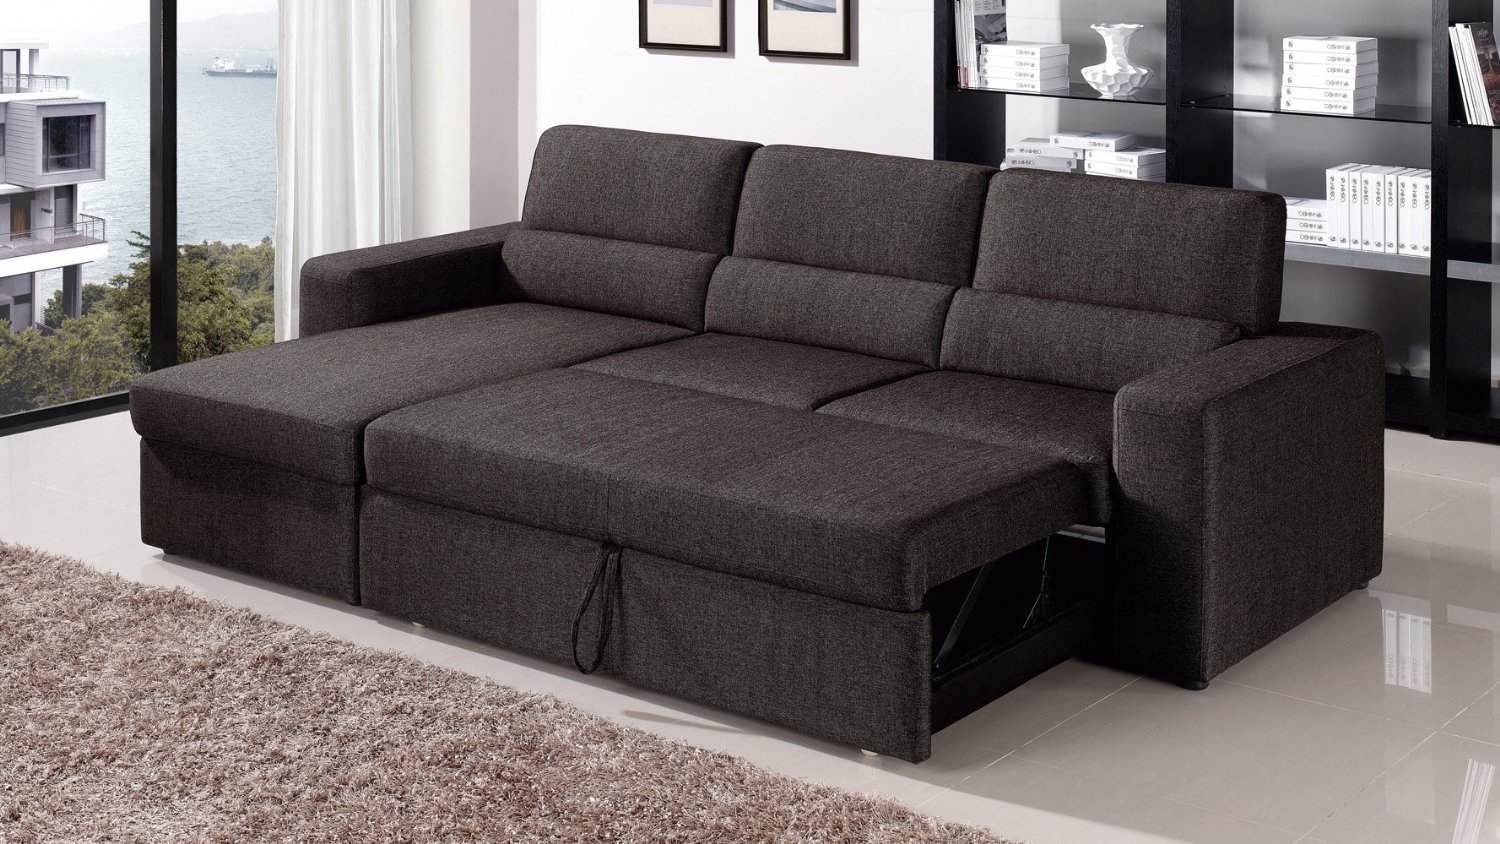 Sectional sleeper sofa with storage Hawk Haven